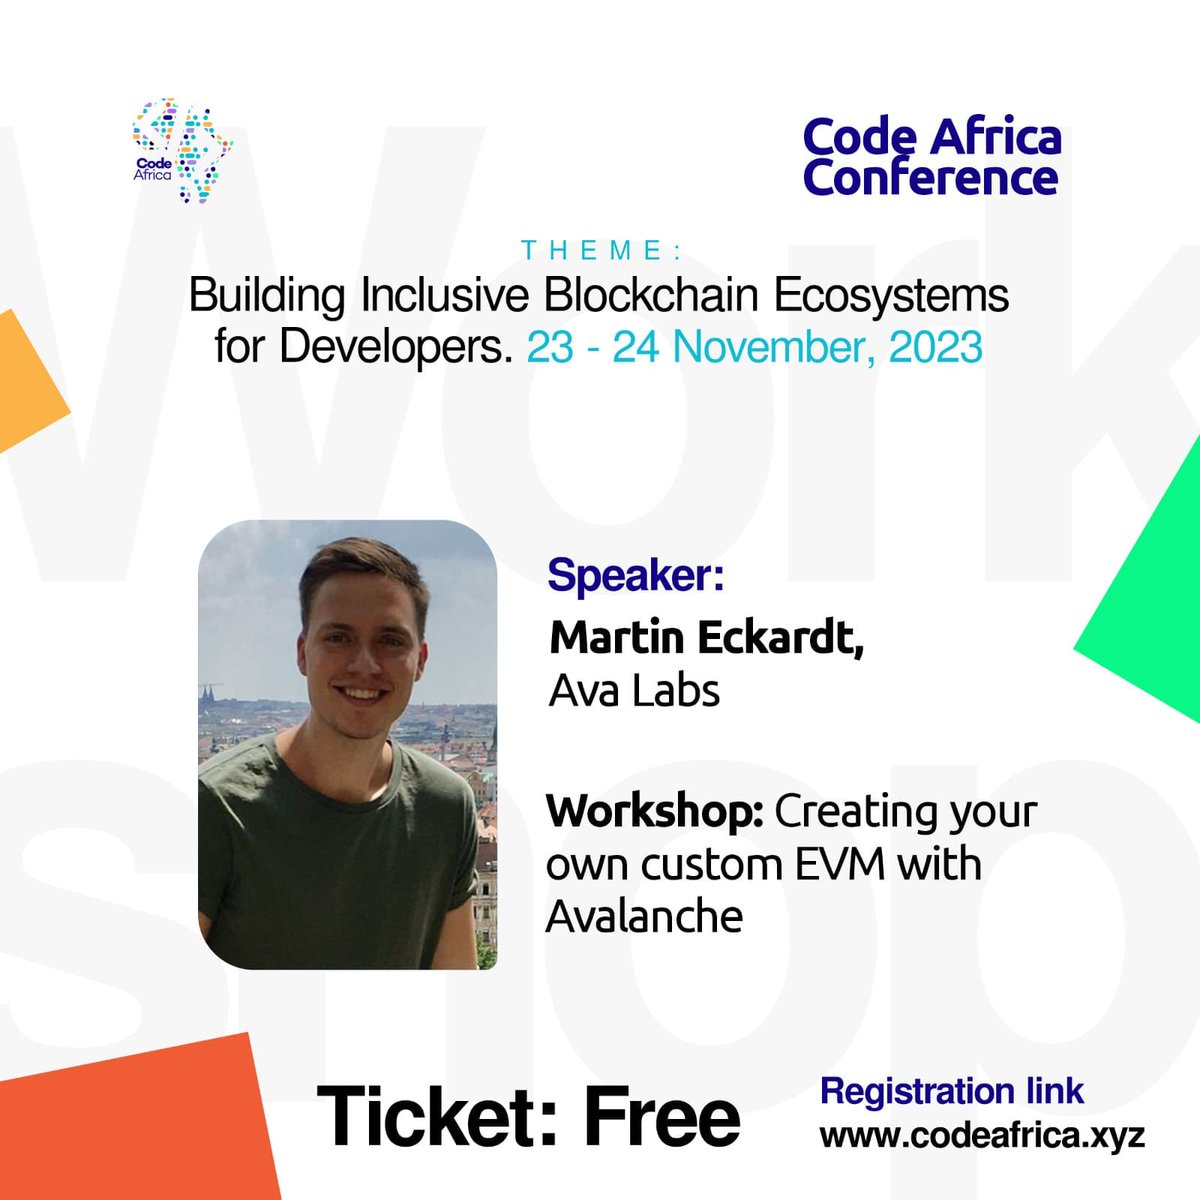 🎙️Avalanche  workshop! Our awesome speaker, @martin_eckardt is cracking up the Code Africa Conference right now! 😄 

Don't miss the insights on creating your own custom EVM avalanche! 🚀

Live now : youtube.com/live/-ZJInlw1M…

 #codeafrica
#2023conference
#africandevelopers